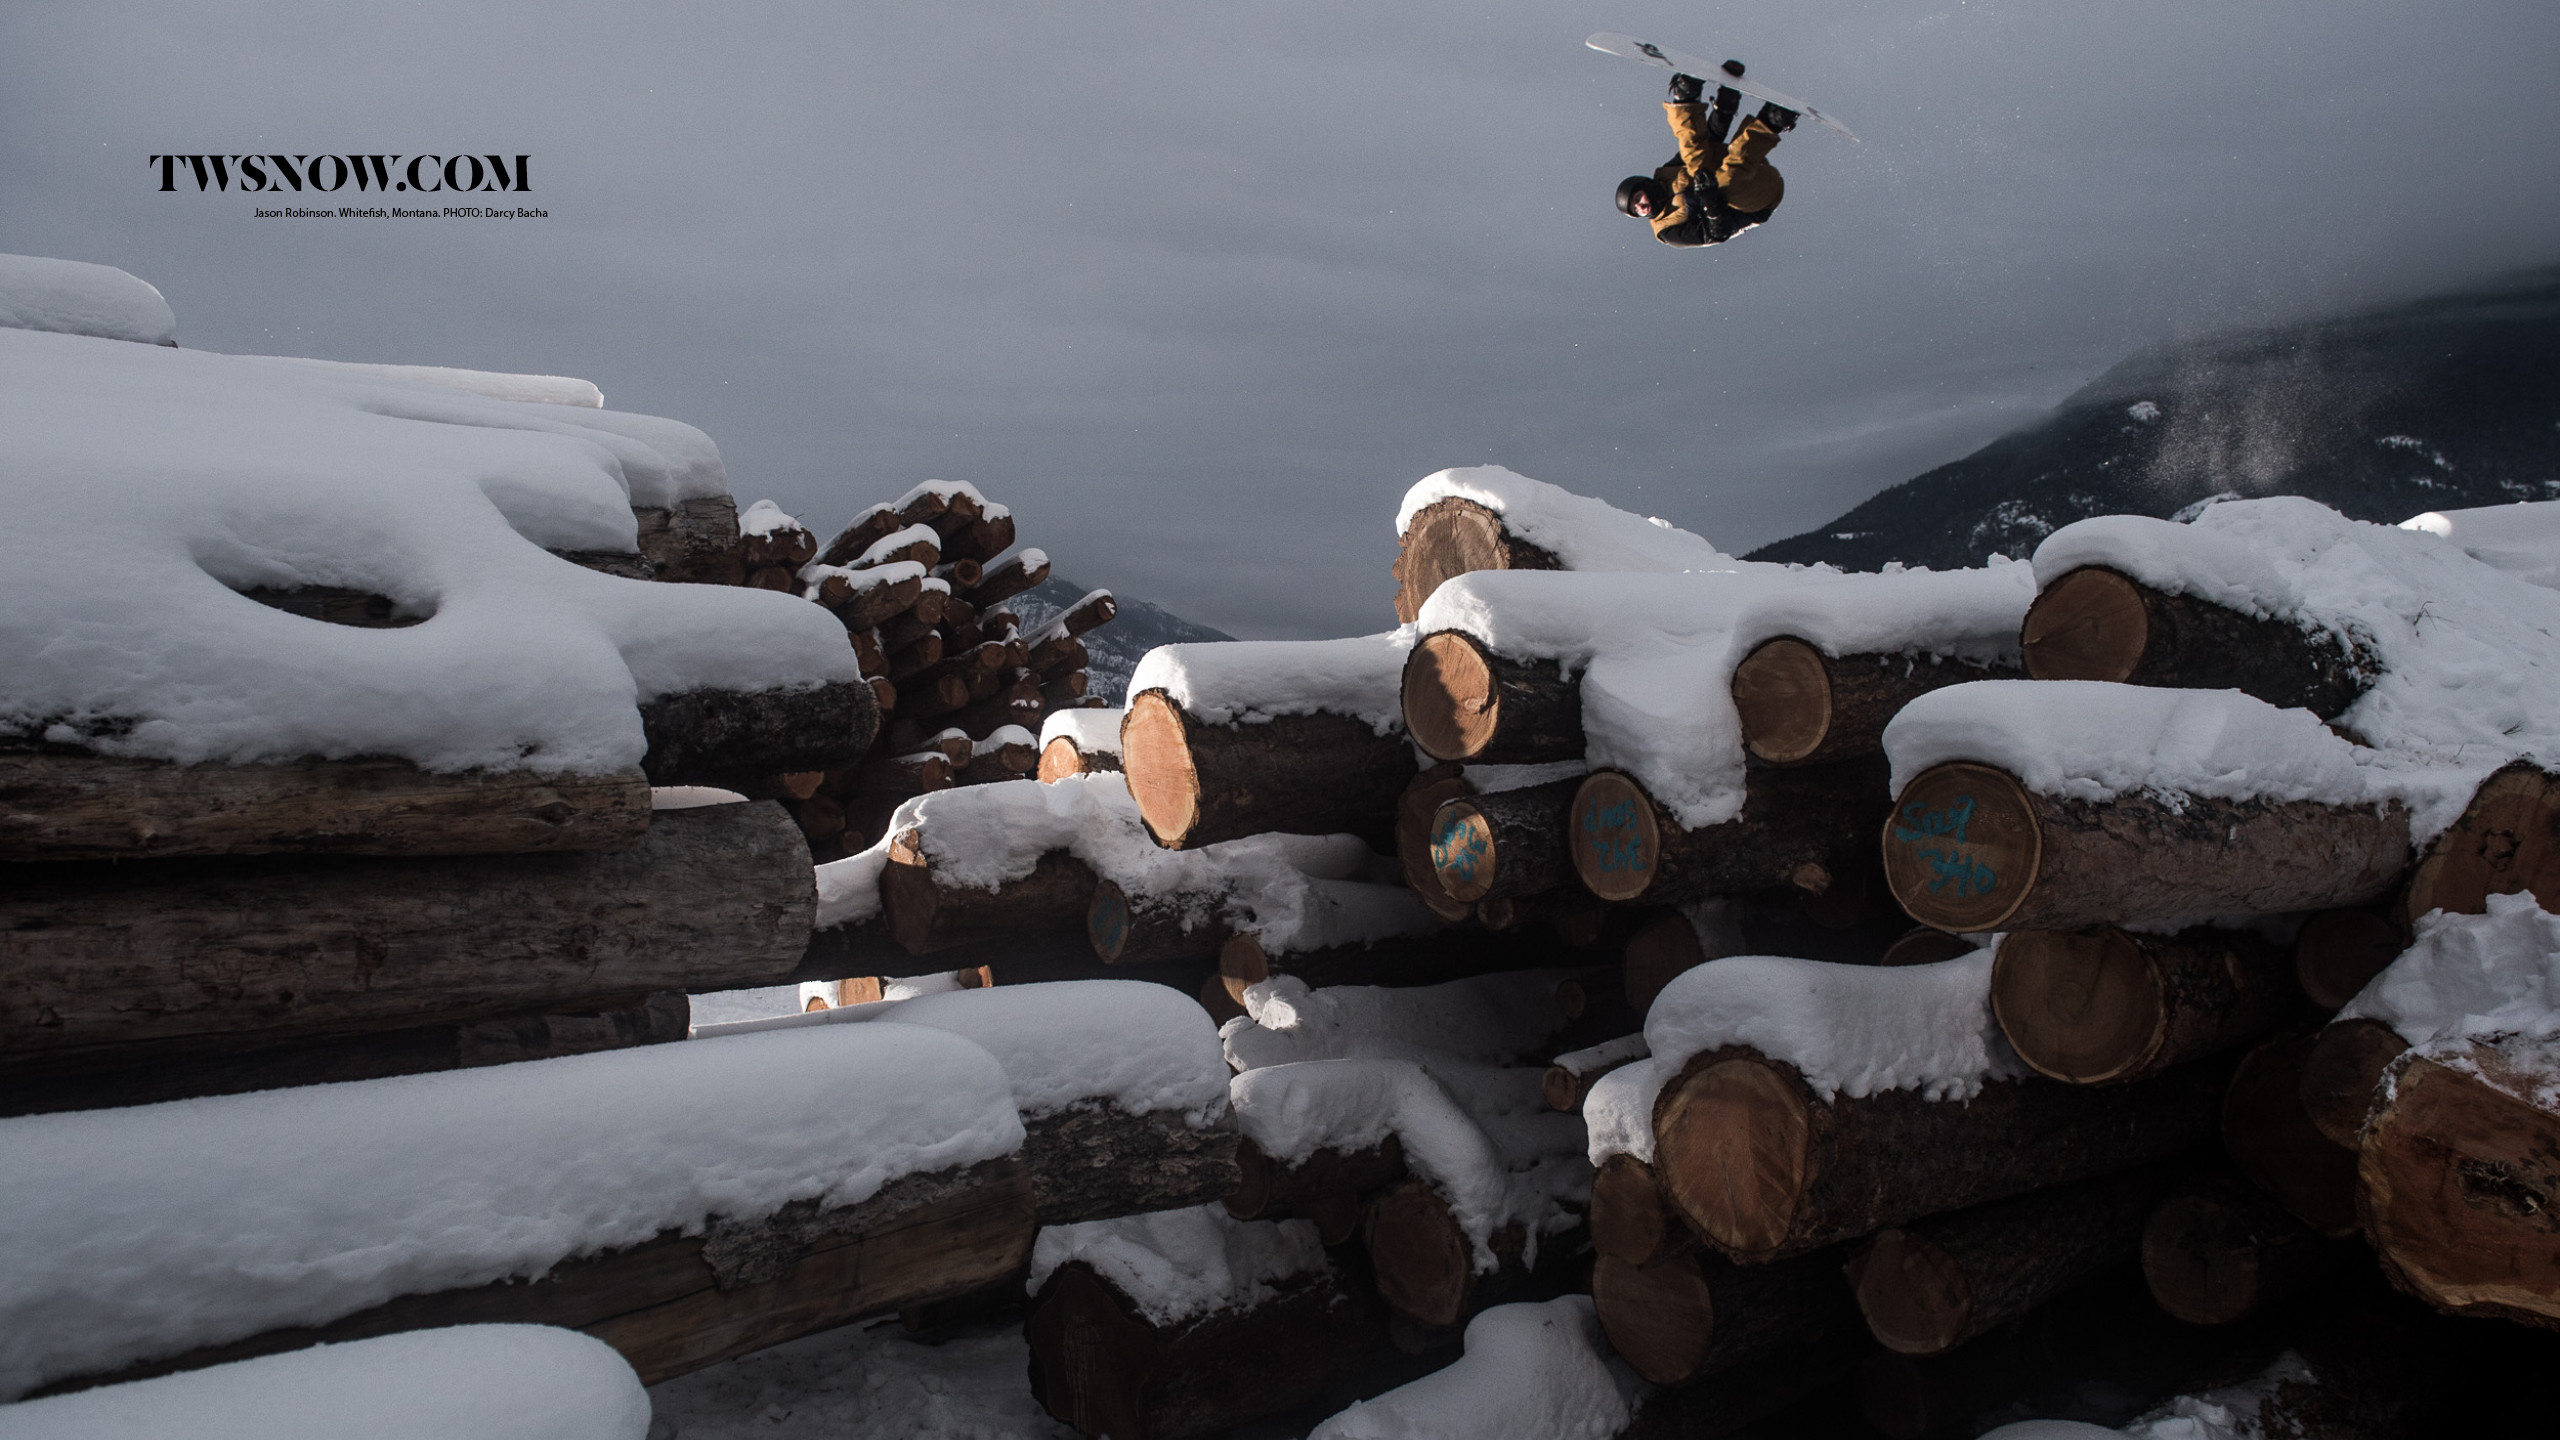 2560x1440 Wallpaper Wednesday: Ozzy Henning and Jason Robinson in Whitefish, MT |  TransWorld SNOWboarding